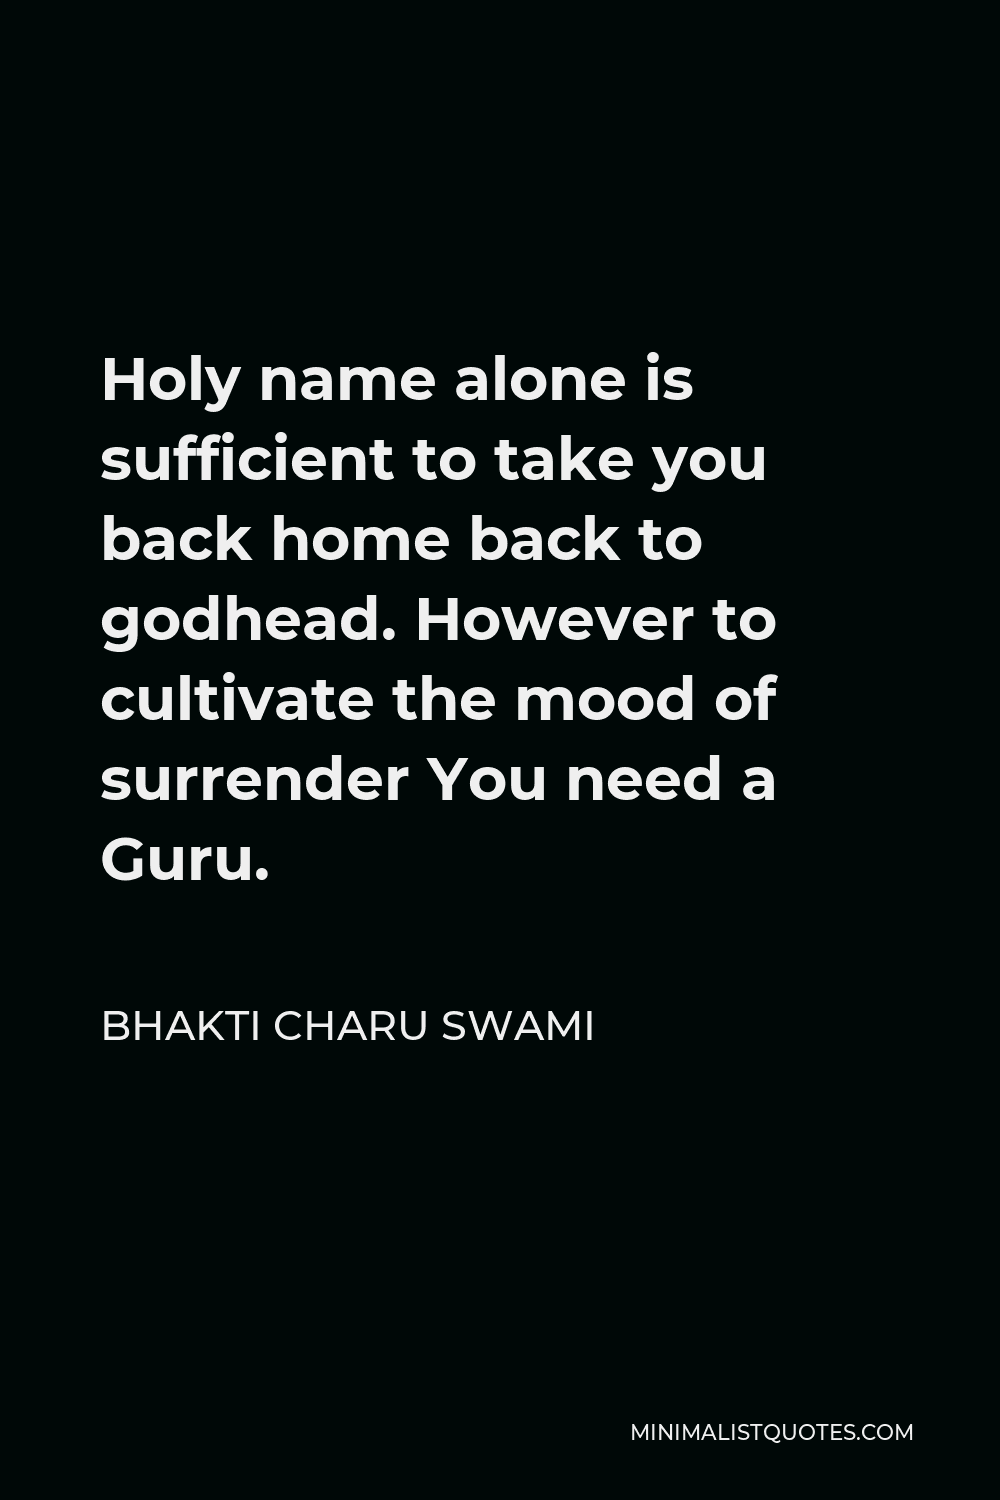 Bhakti Charu Swami Quote - Holy name alone is sufficient to take you back home back to godhead. However to cultivate the mood of surrender You need a Guru.